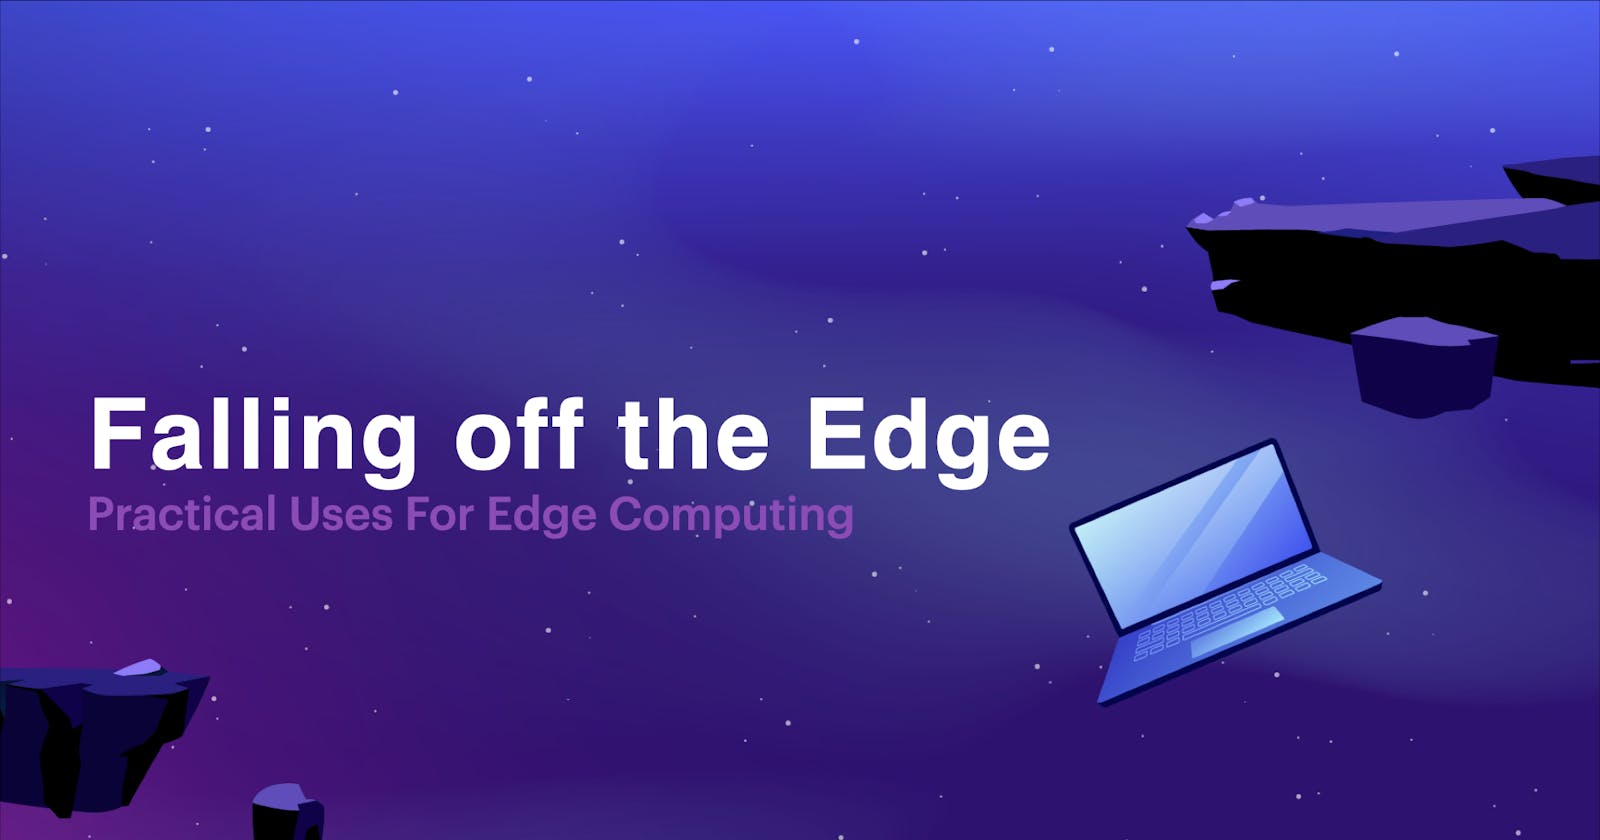 Practical Use Cases for Edge Computing